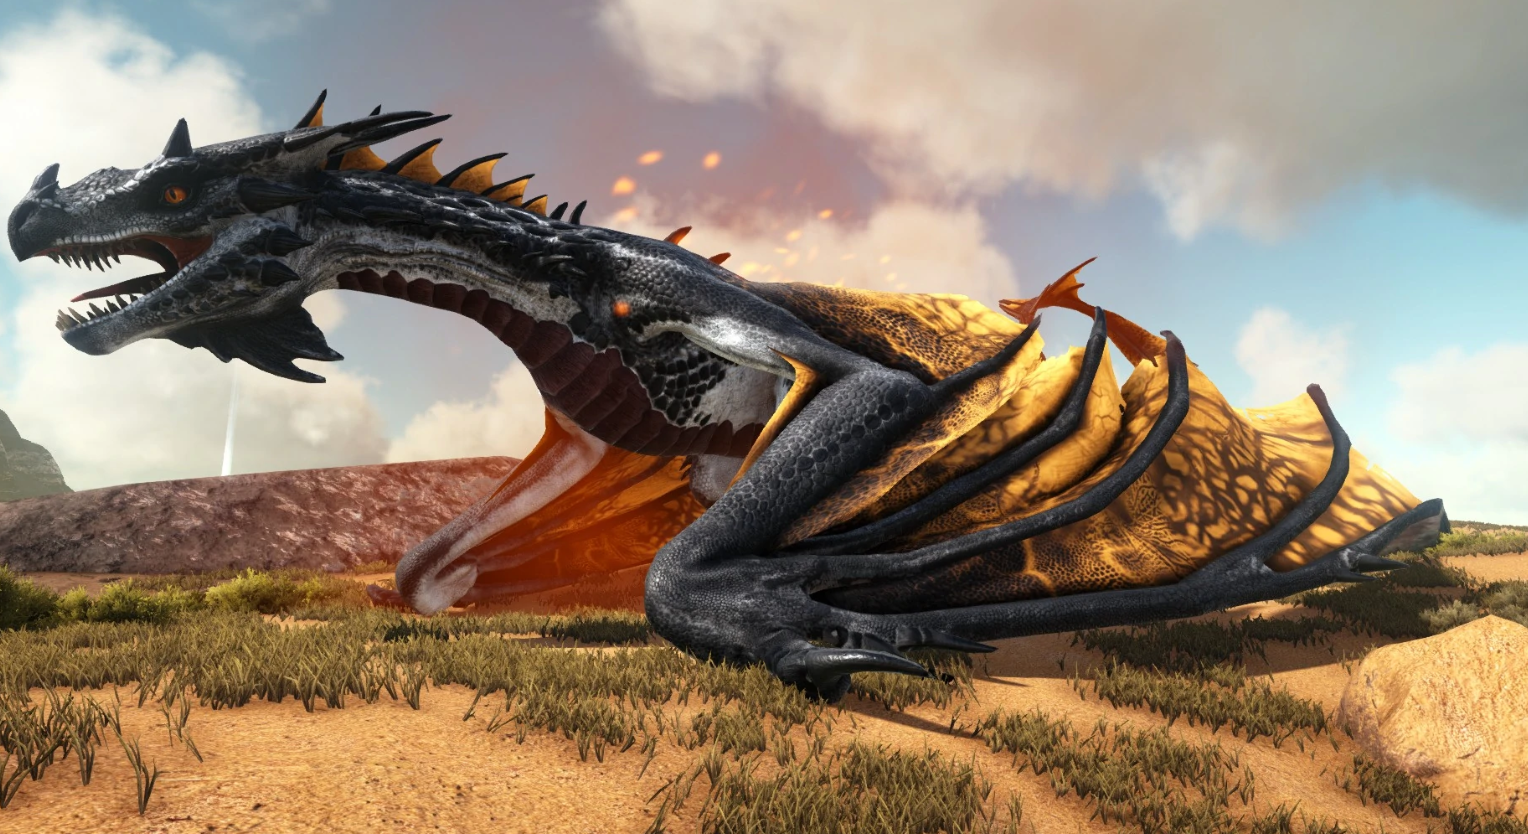 SOME OF THE FAMOUS ARK WYVERN GAME PLAYED MOST